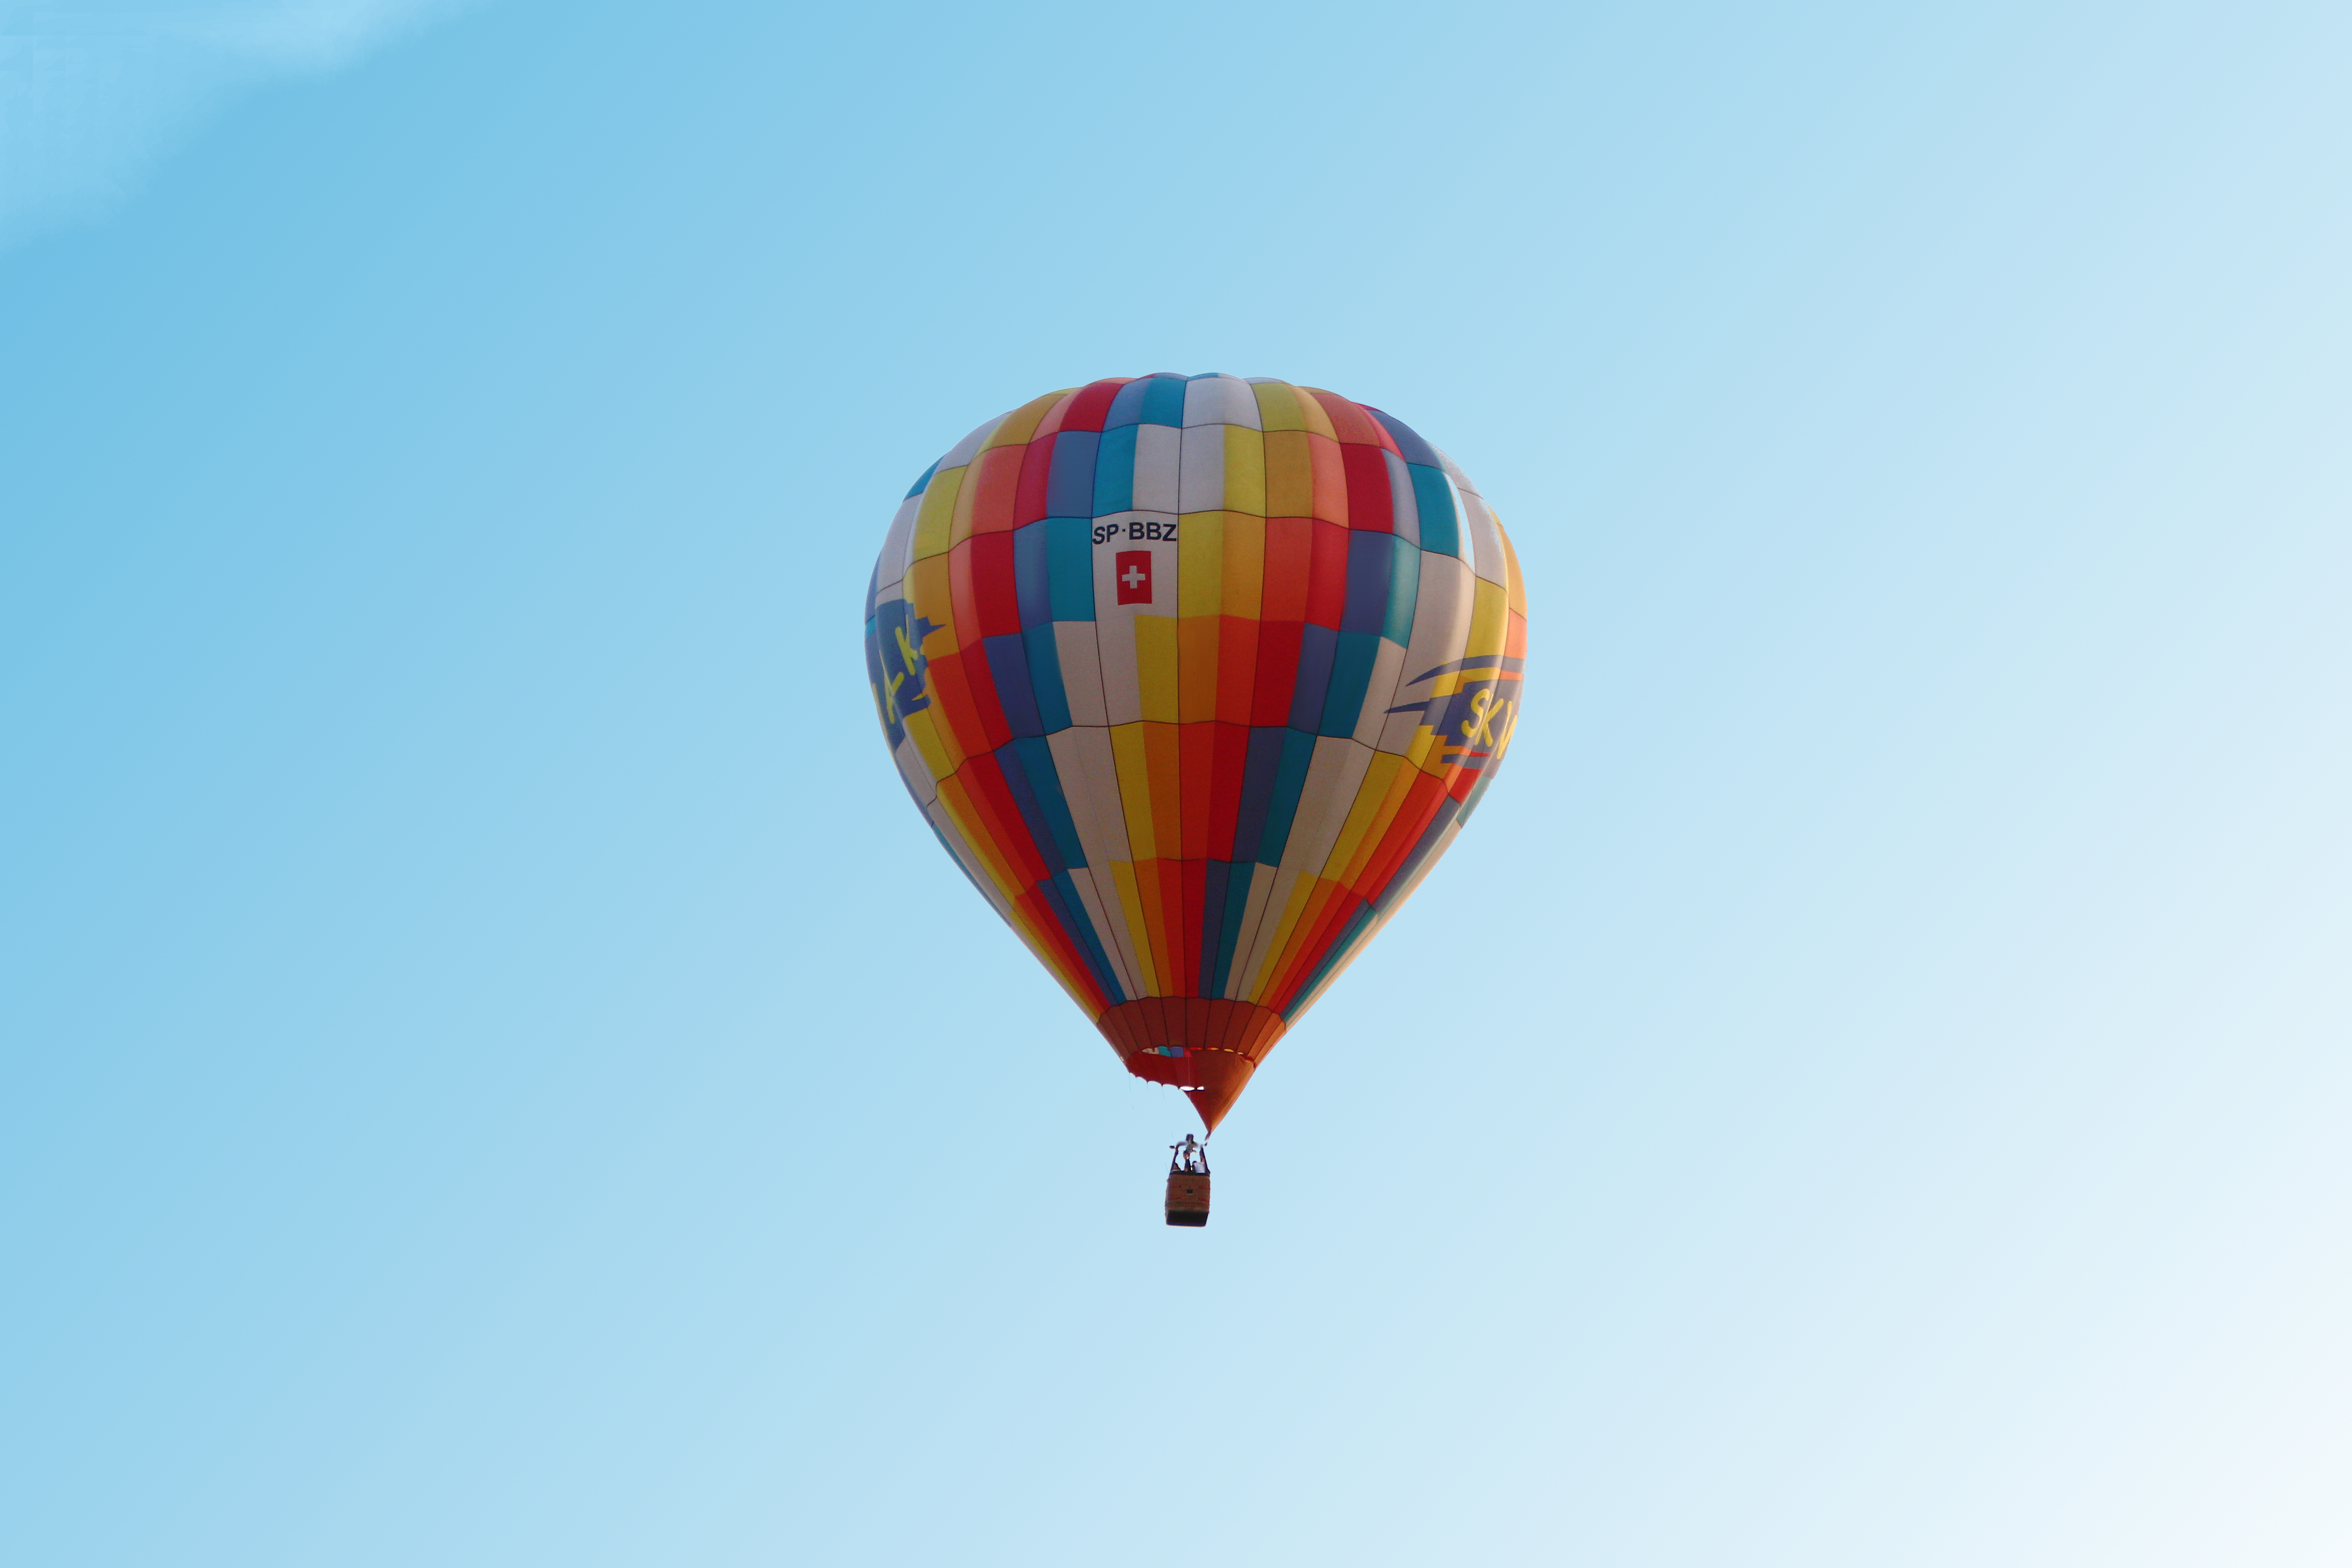 General 5184x3456 hot air balloons colorful sky vehicle